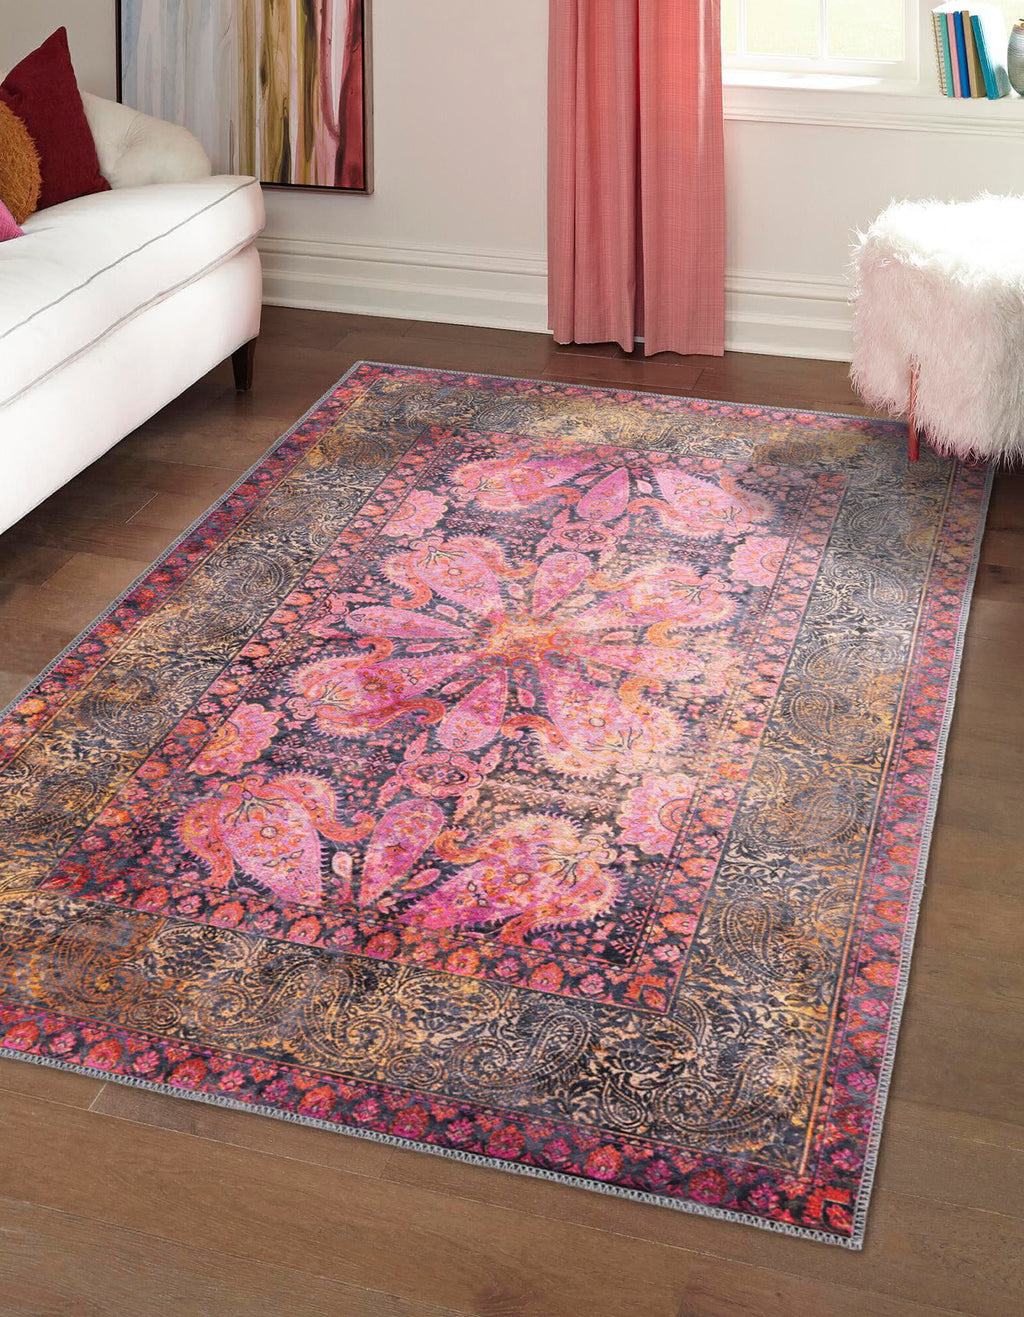 Unique Loom Mangata T-MNG2 Pink Area Rug Rectangle Lifestyle Image Feature